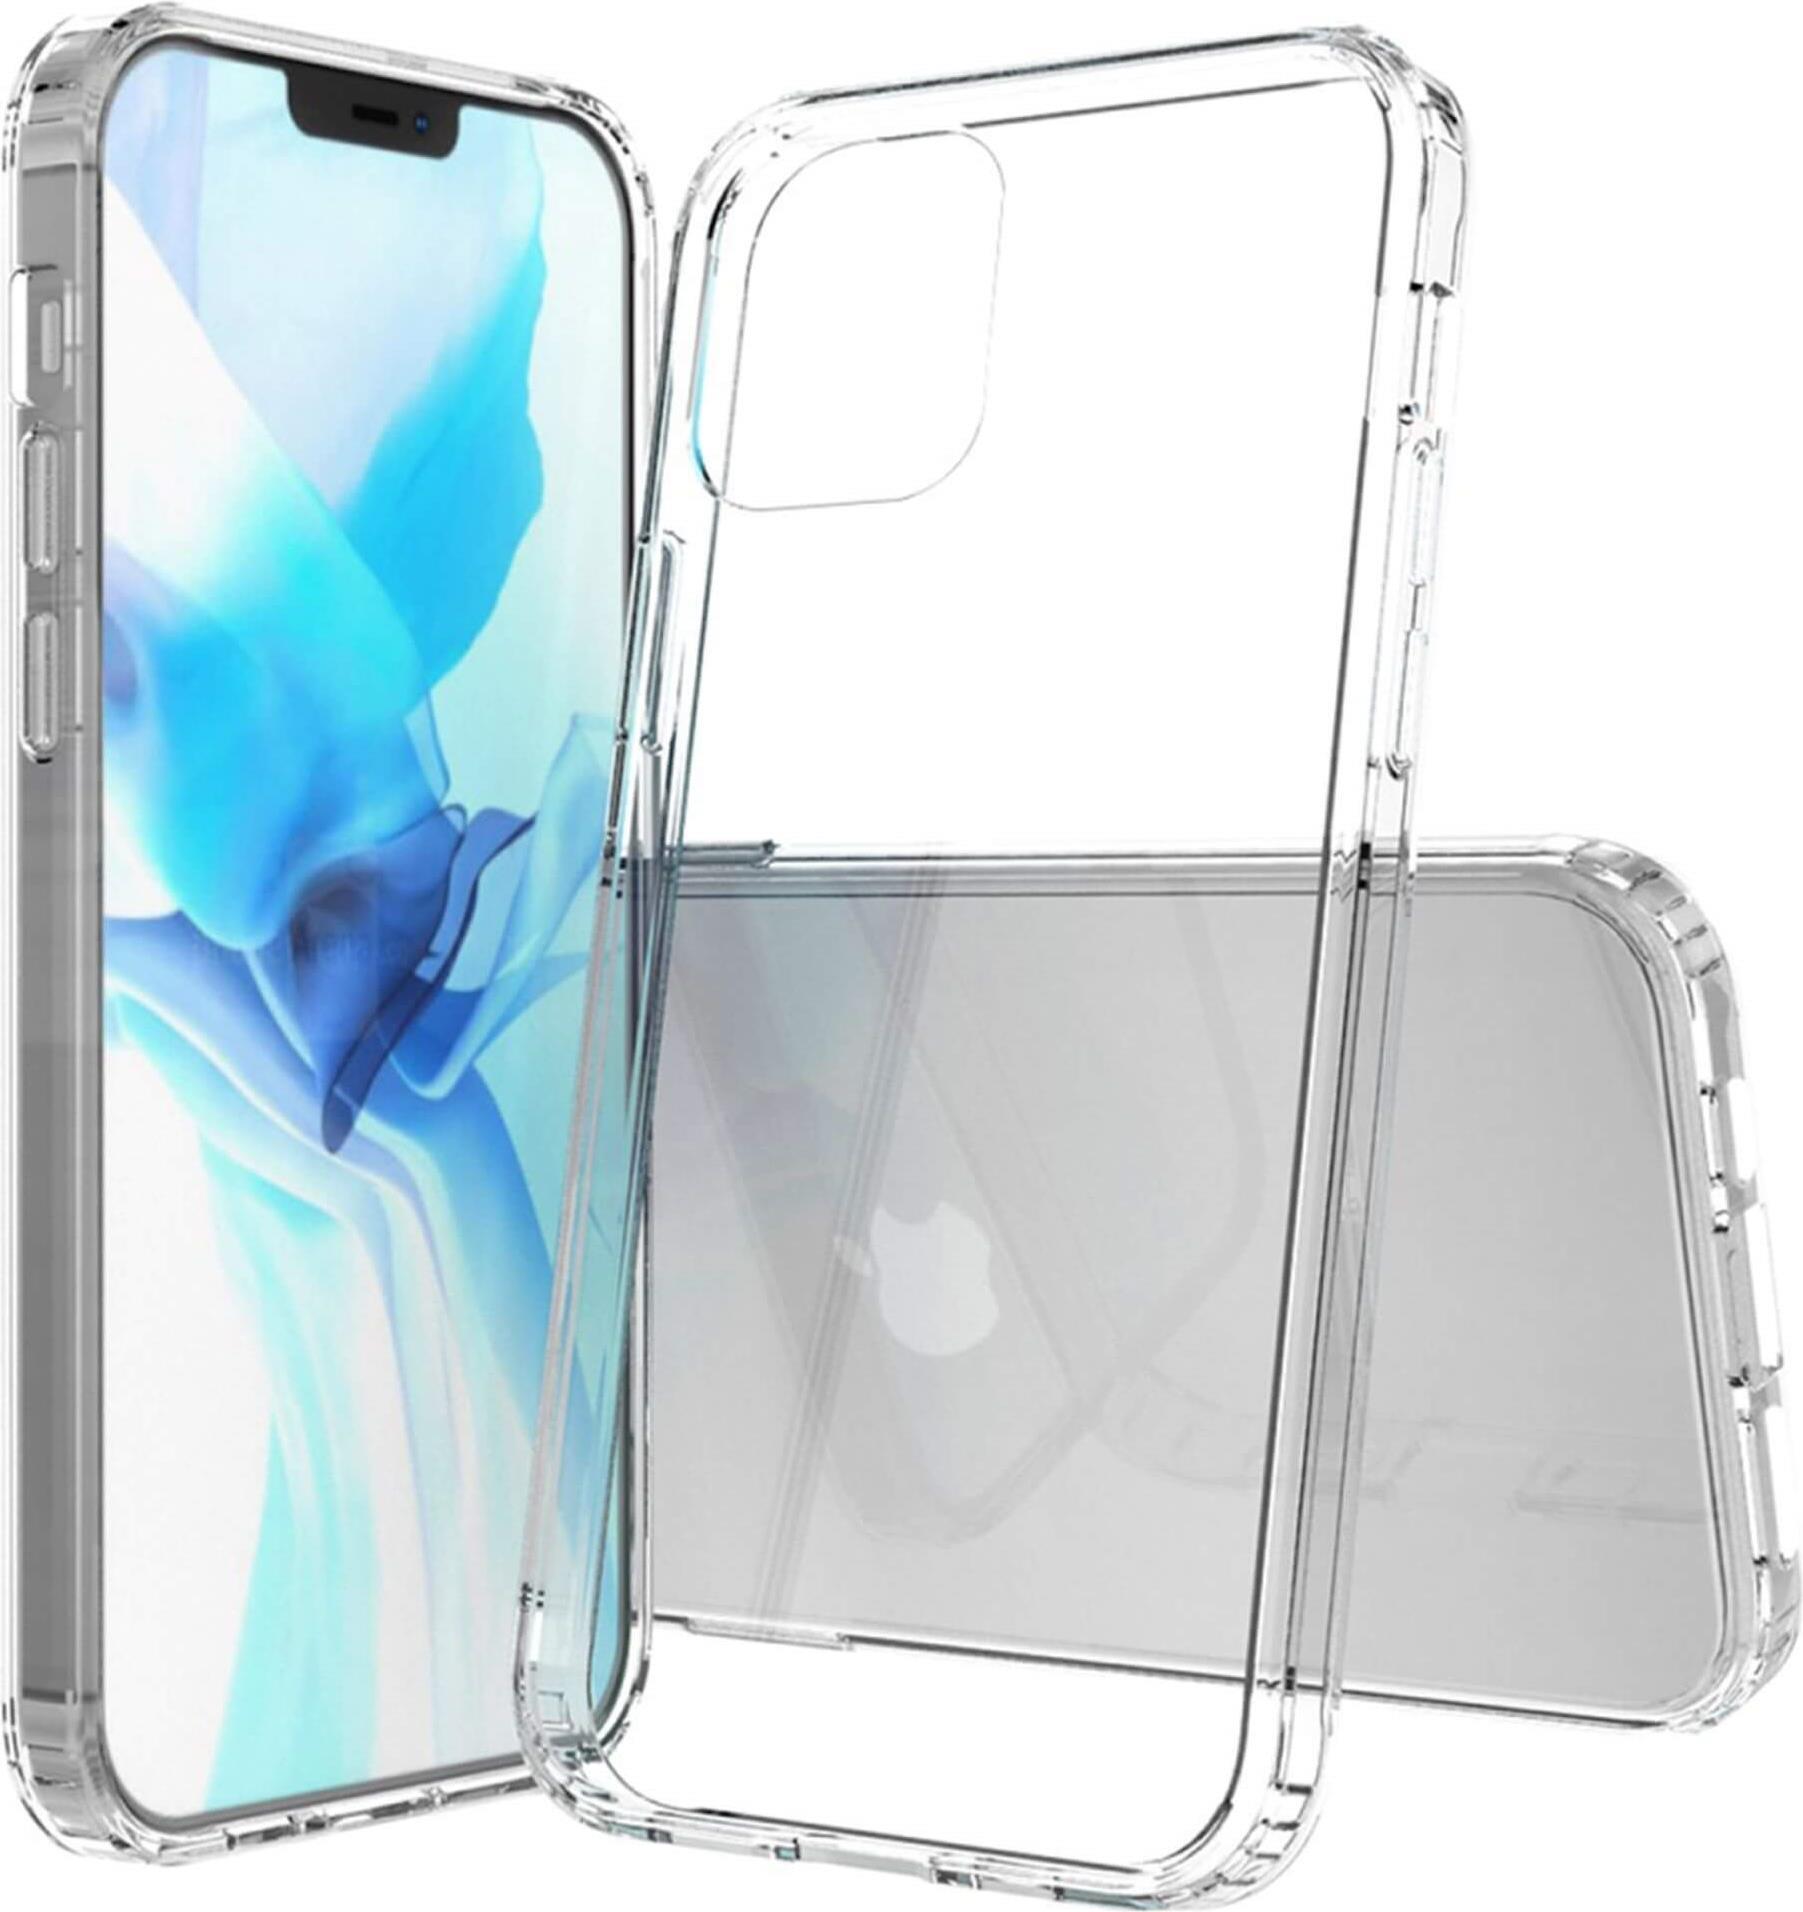 grotop JT BackCase Pankow Clear für NEW iPhone 6.1, Transparent (10692)